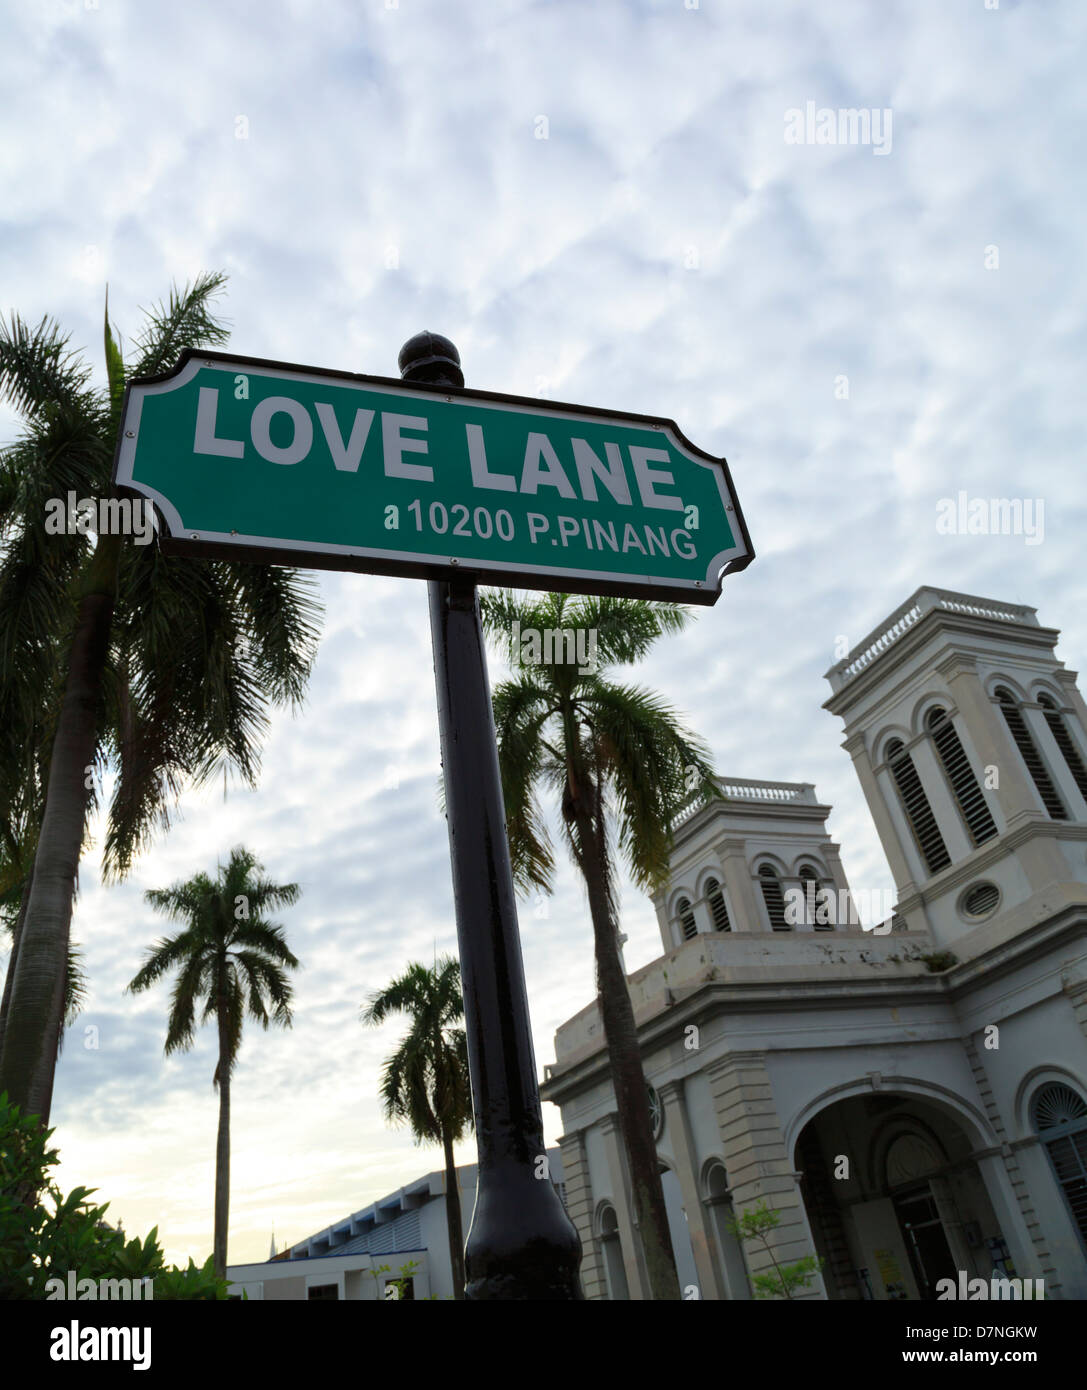 Liebe Spur Straßenschild in George Town, Penang, Malaysia Stockfoto